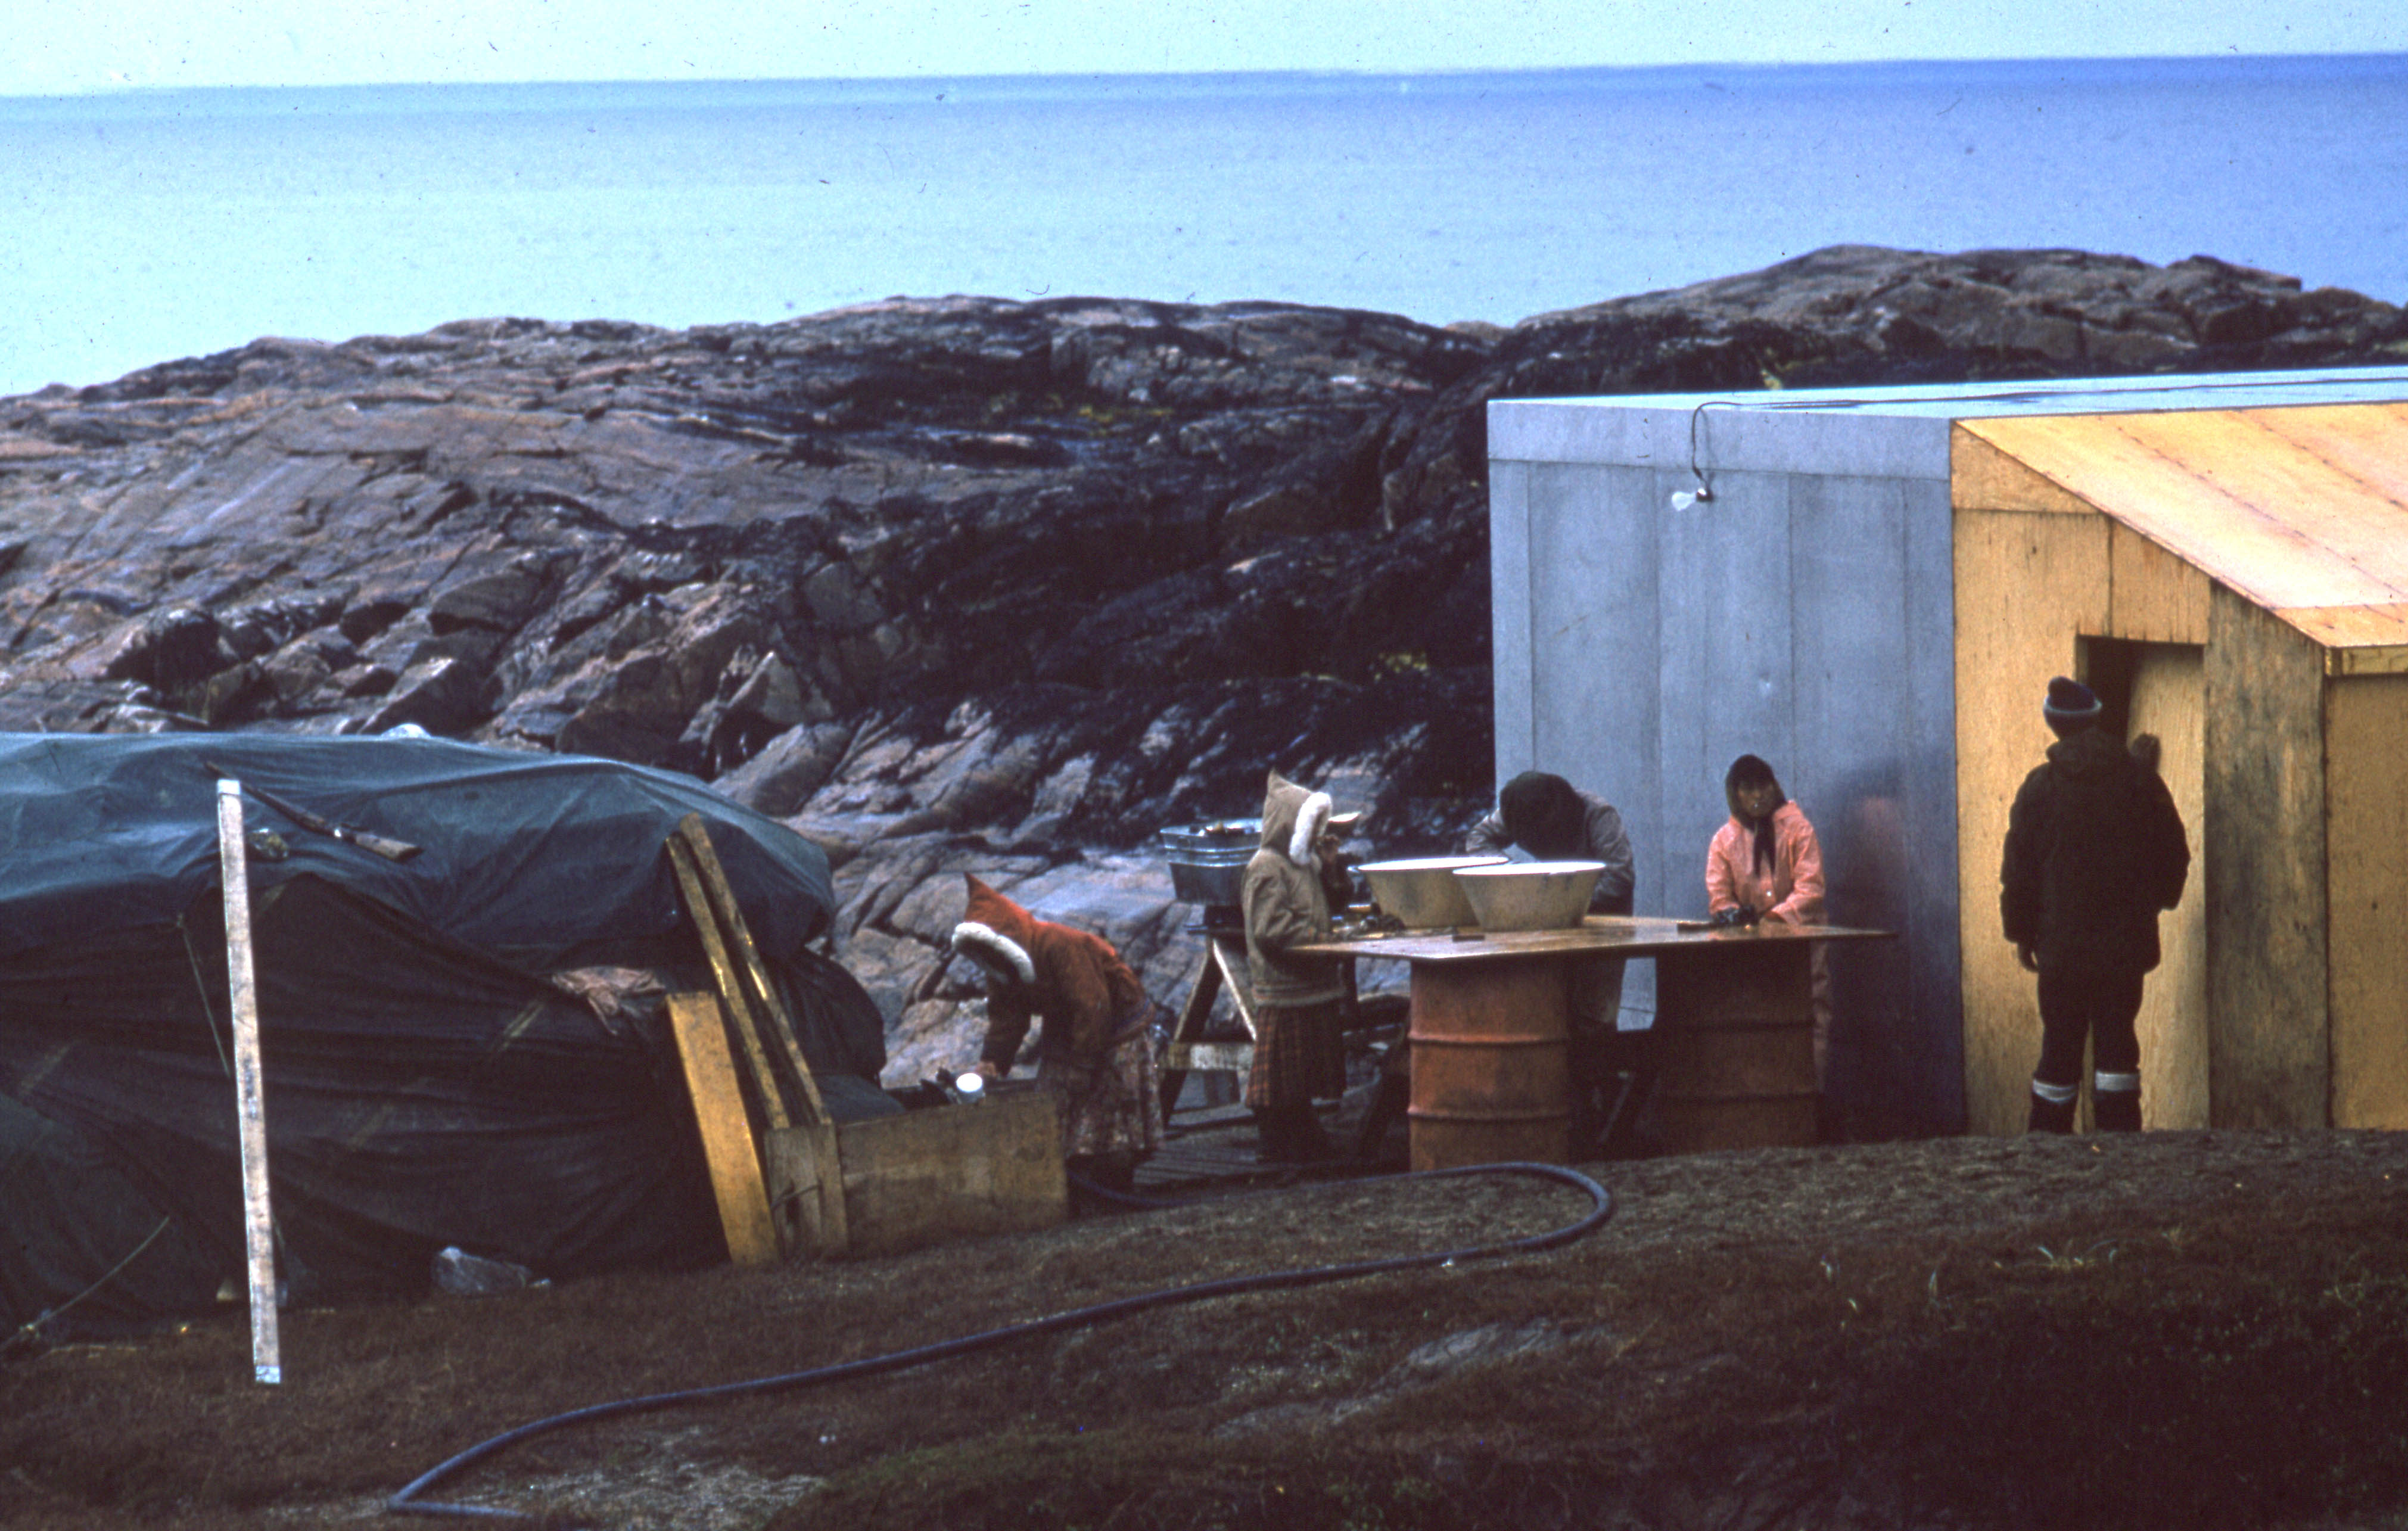 The freezer site for the George River char fishery, 1960